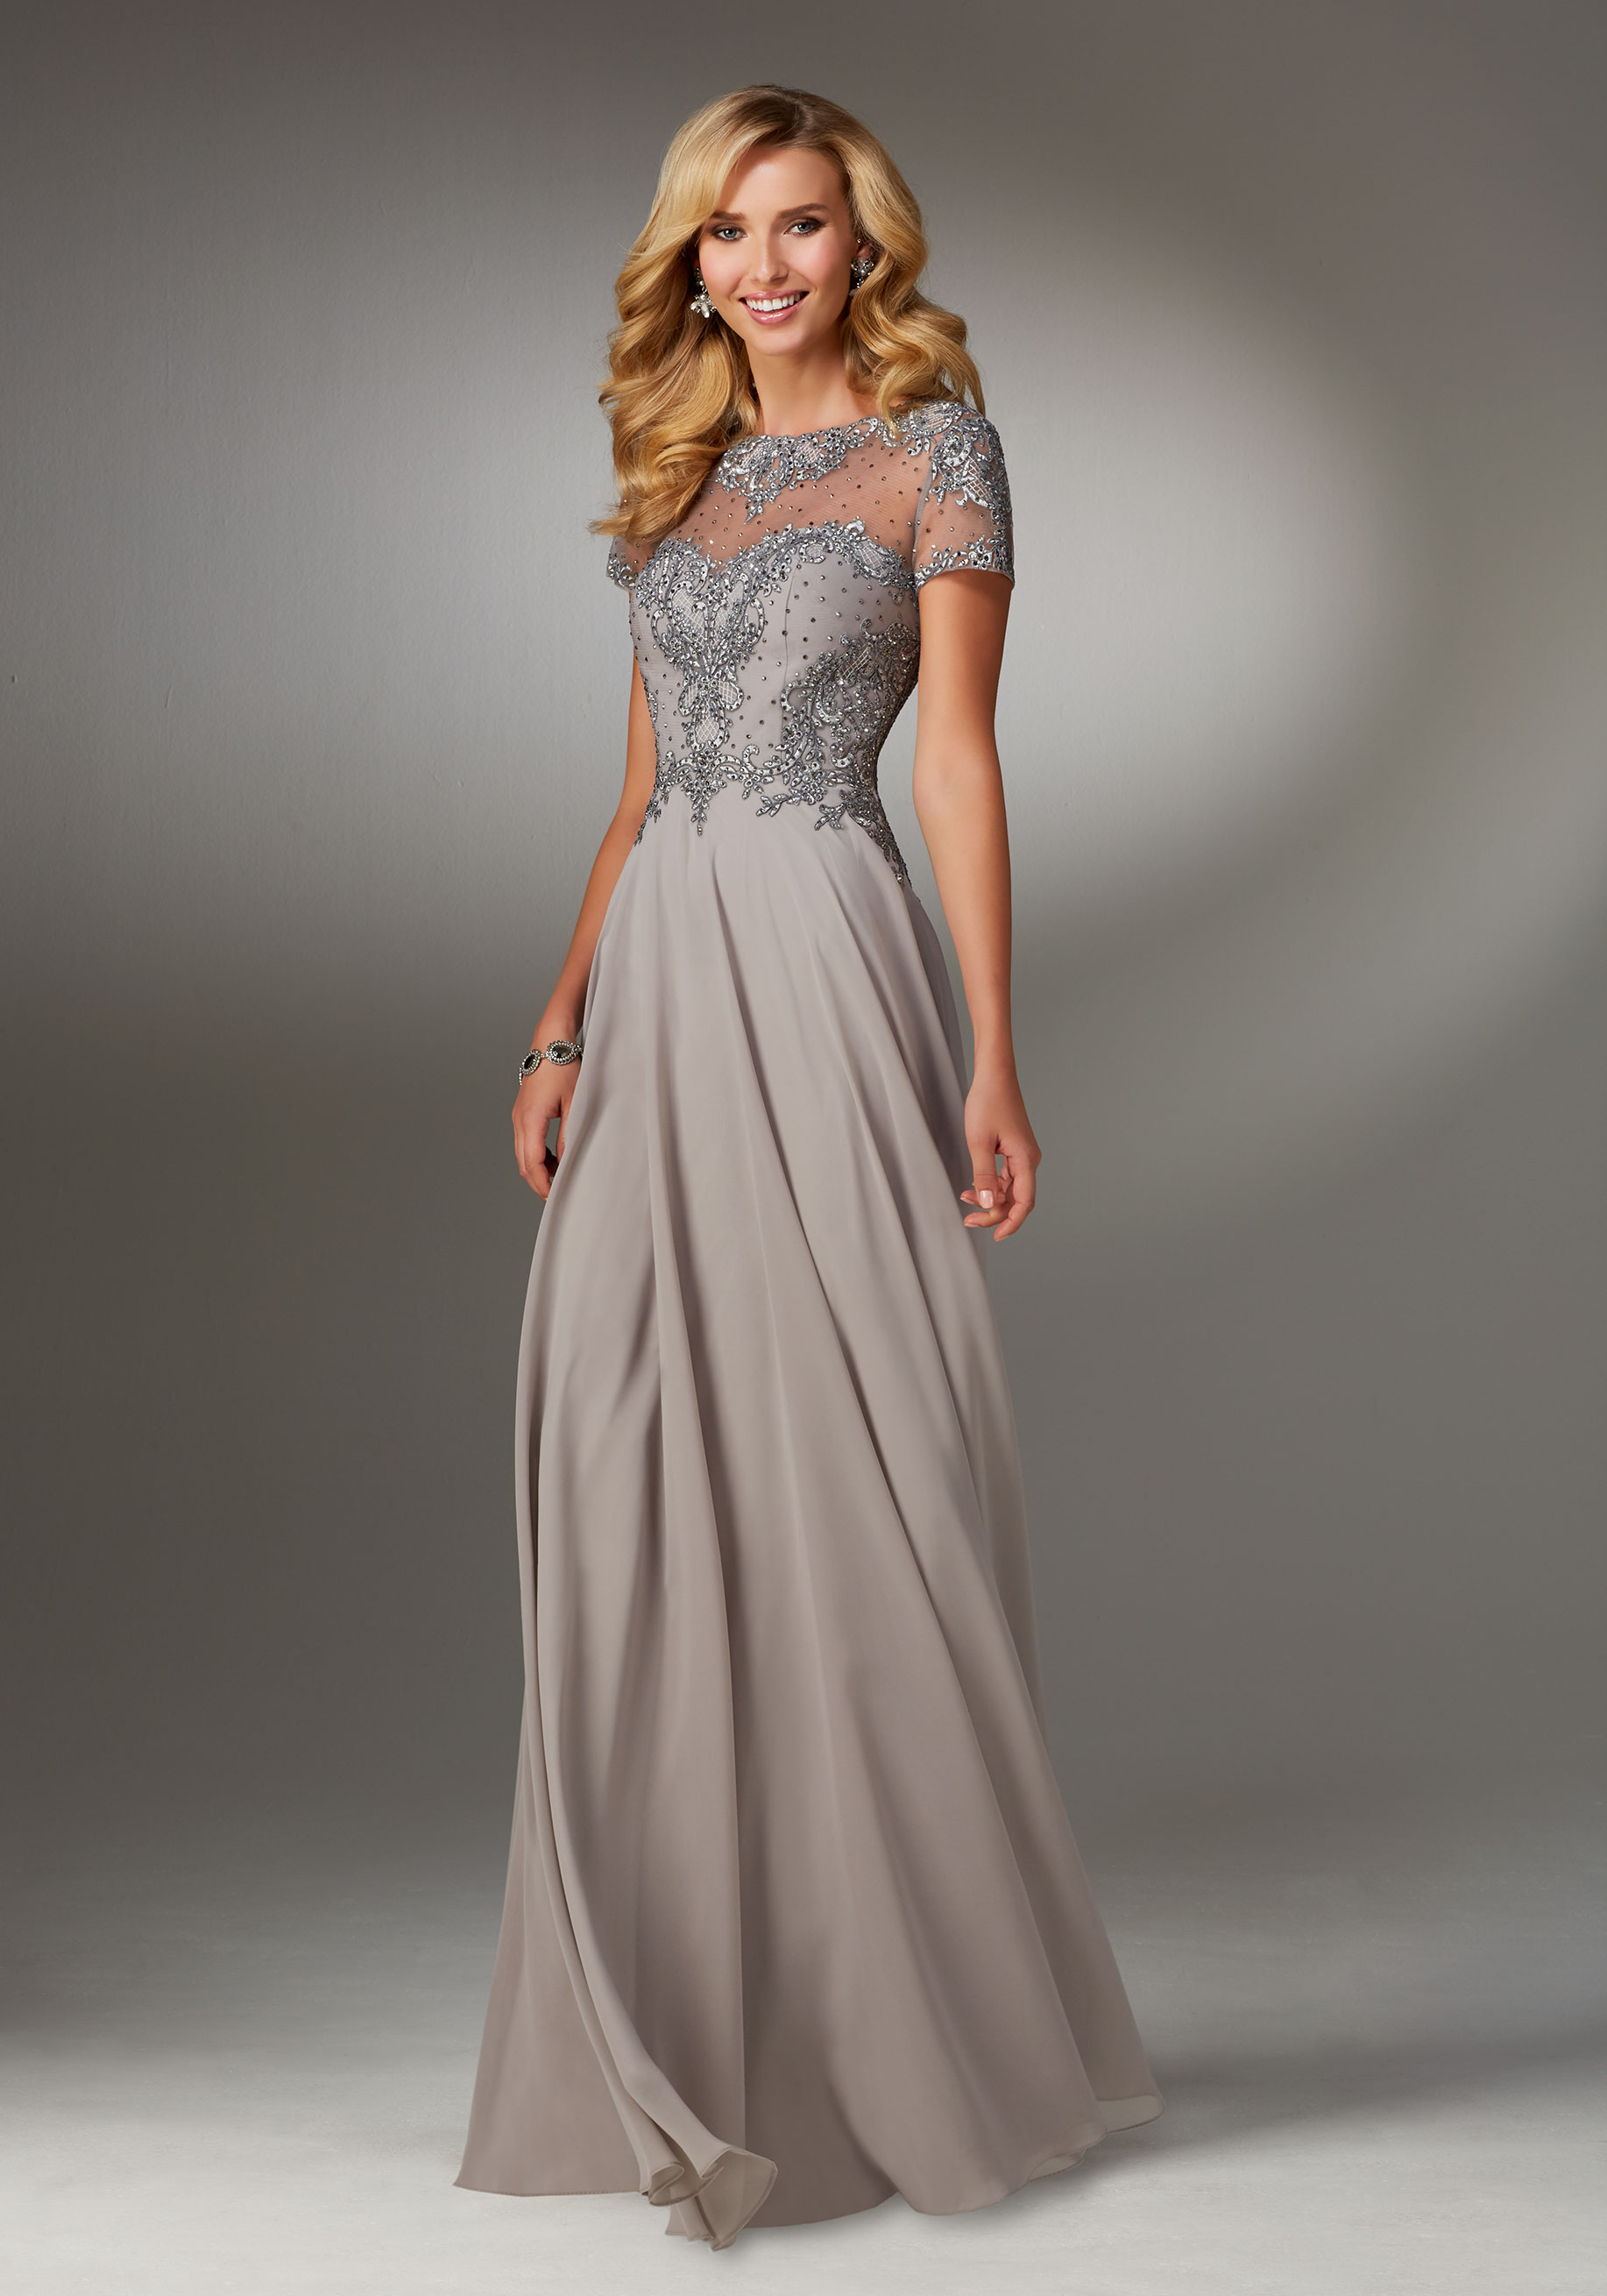 Chiffon Special Occasion Dress with Beaded Embroidery on Bodice